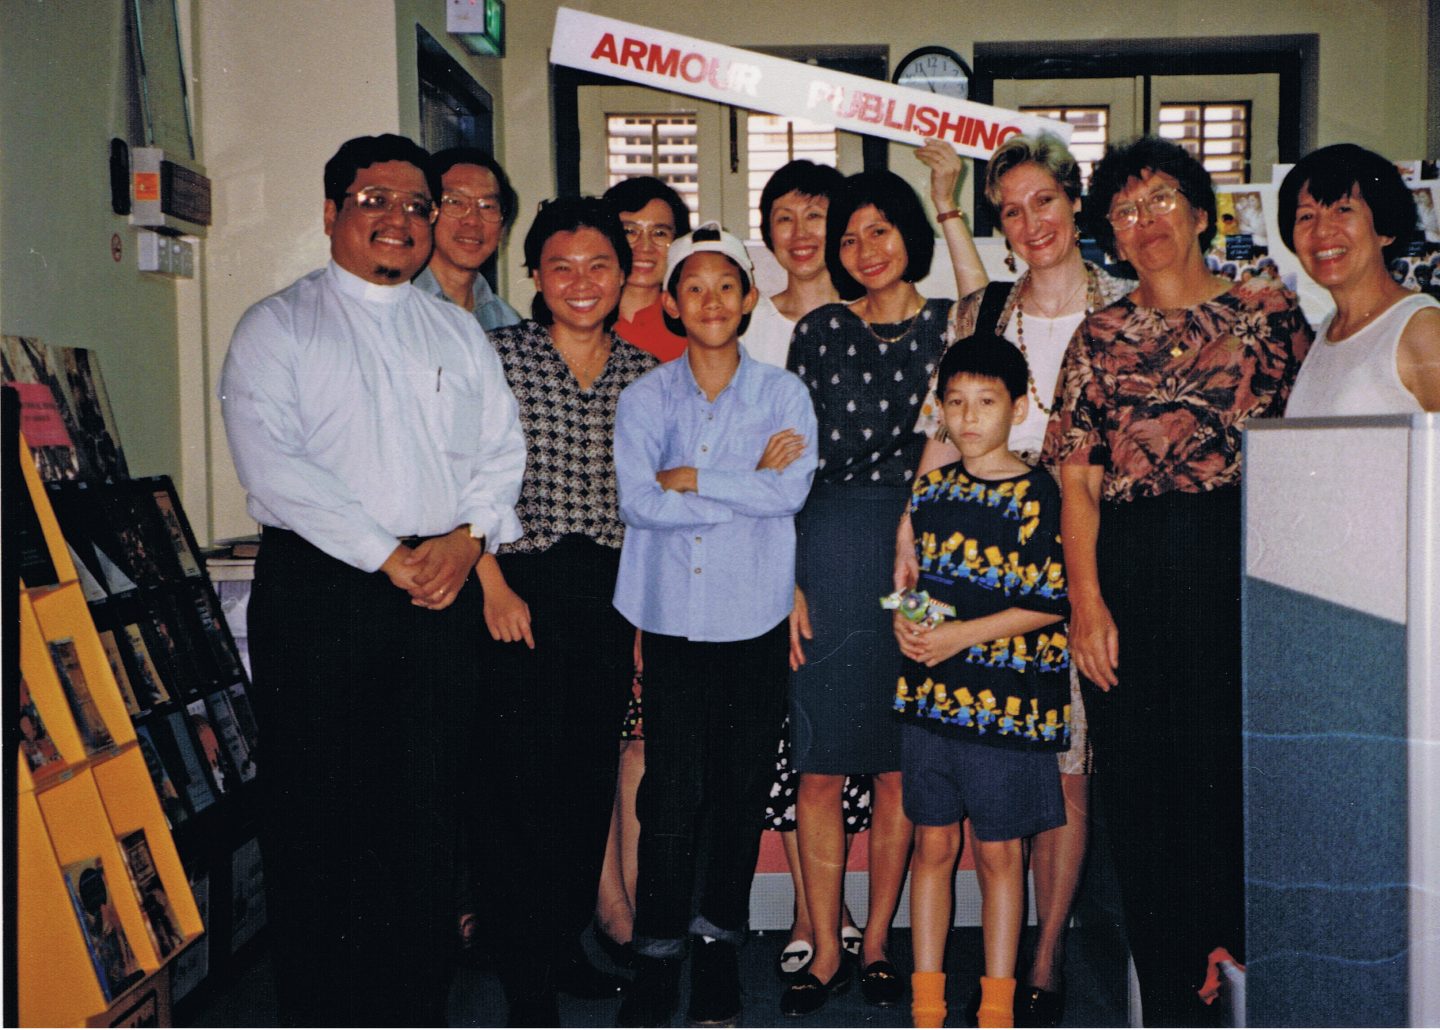 Emeritus Bishop Robert Solomon and the Armour team, family and friends at the opening of the new office at Sago Street, Chinatown, 1995